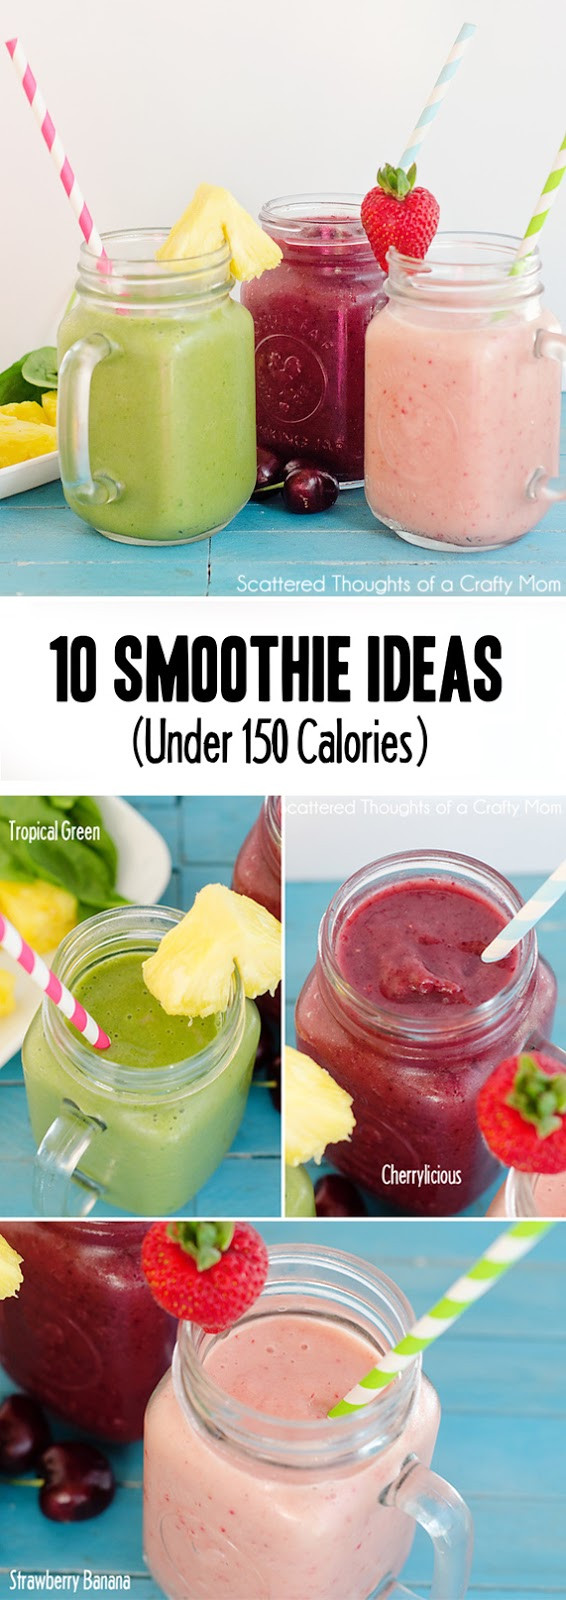 Healthy Low Calorie Smoothies
 10 Smoothie Ideas under 150 calories